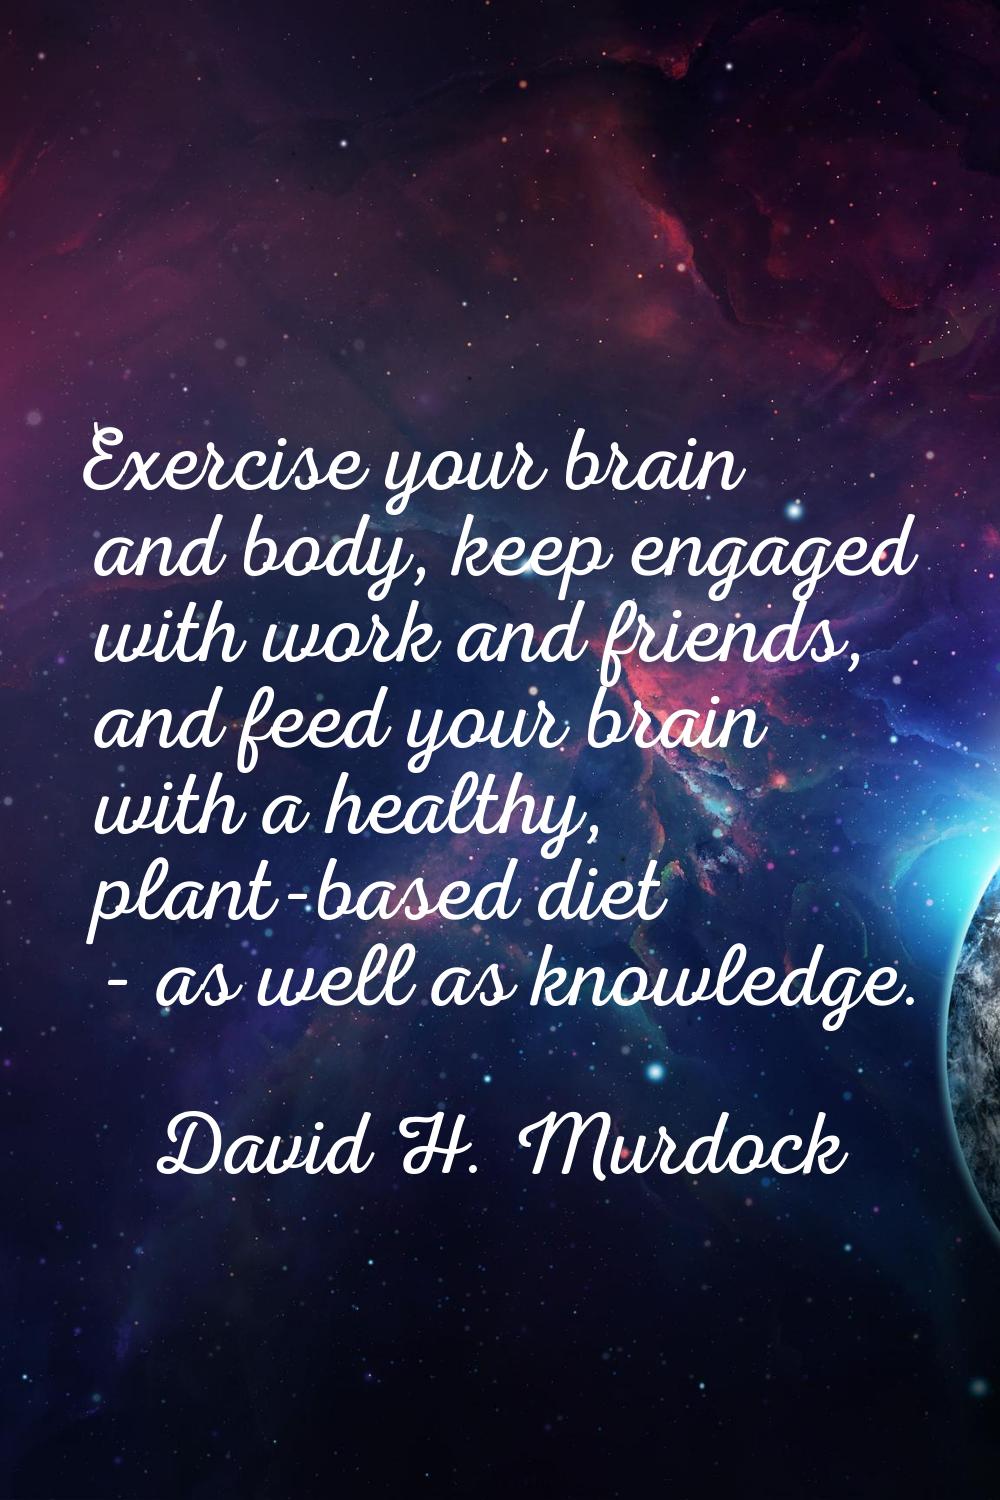 Exercise your brain and body, keep engaged with work and friends, and feed your brain with a health